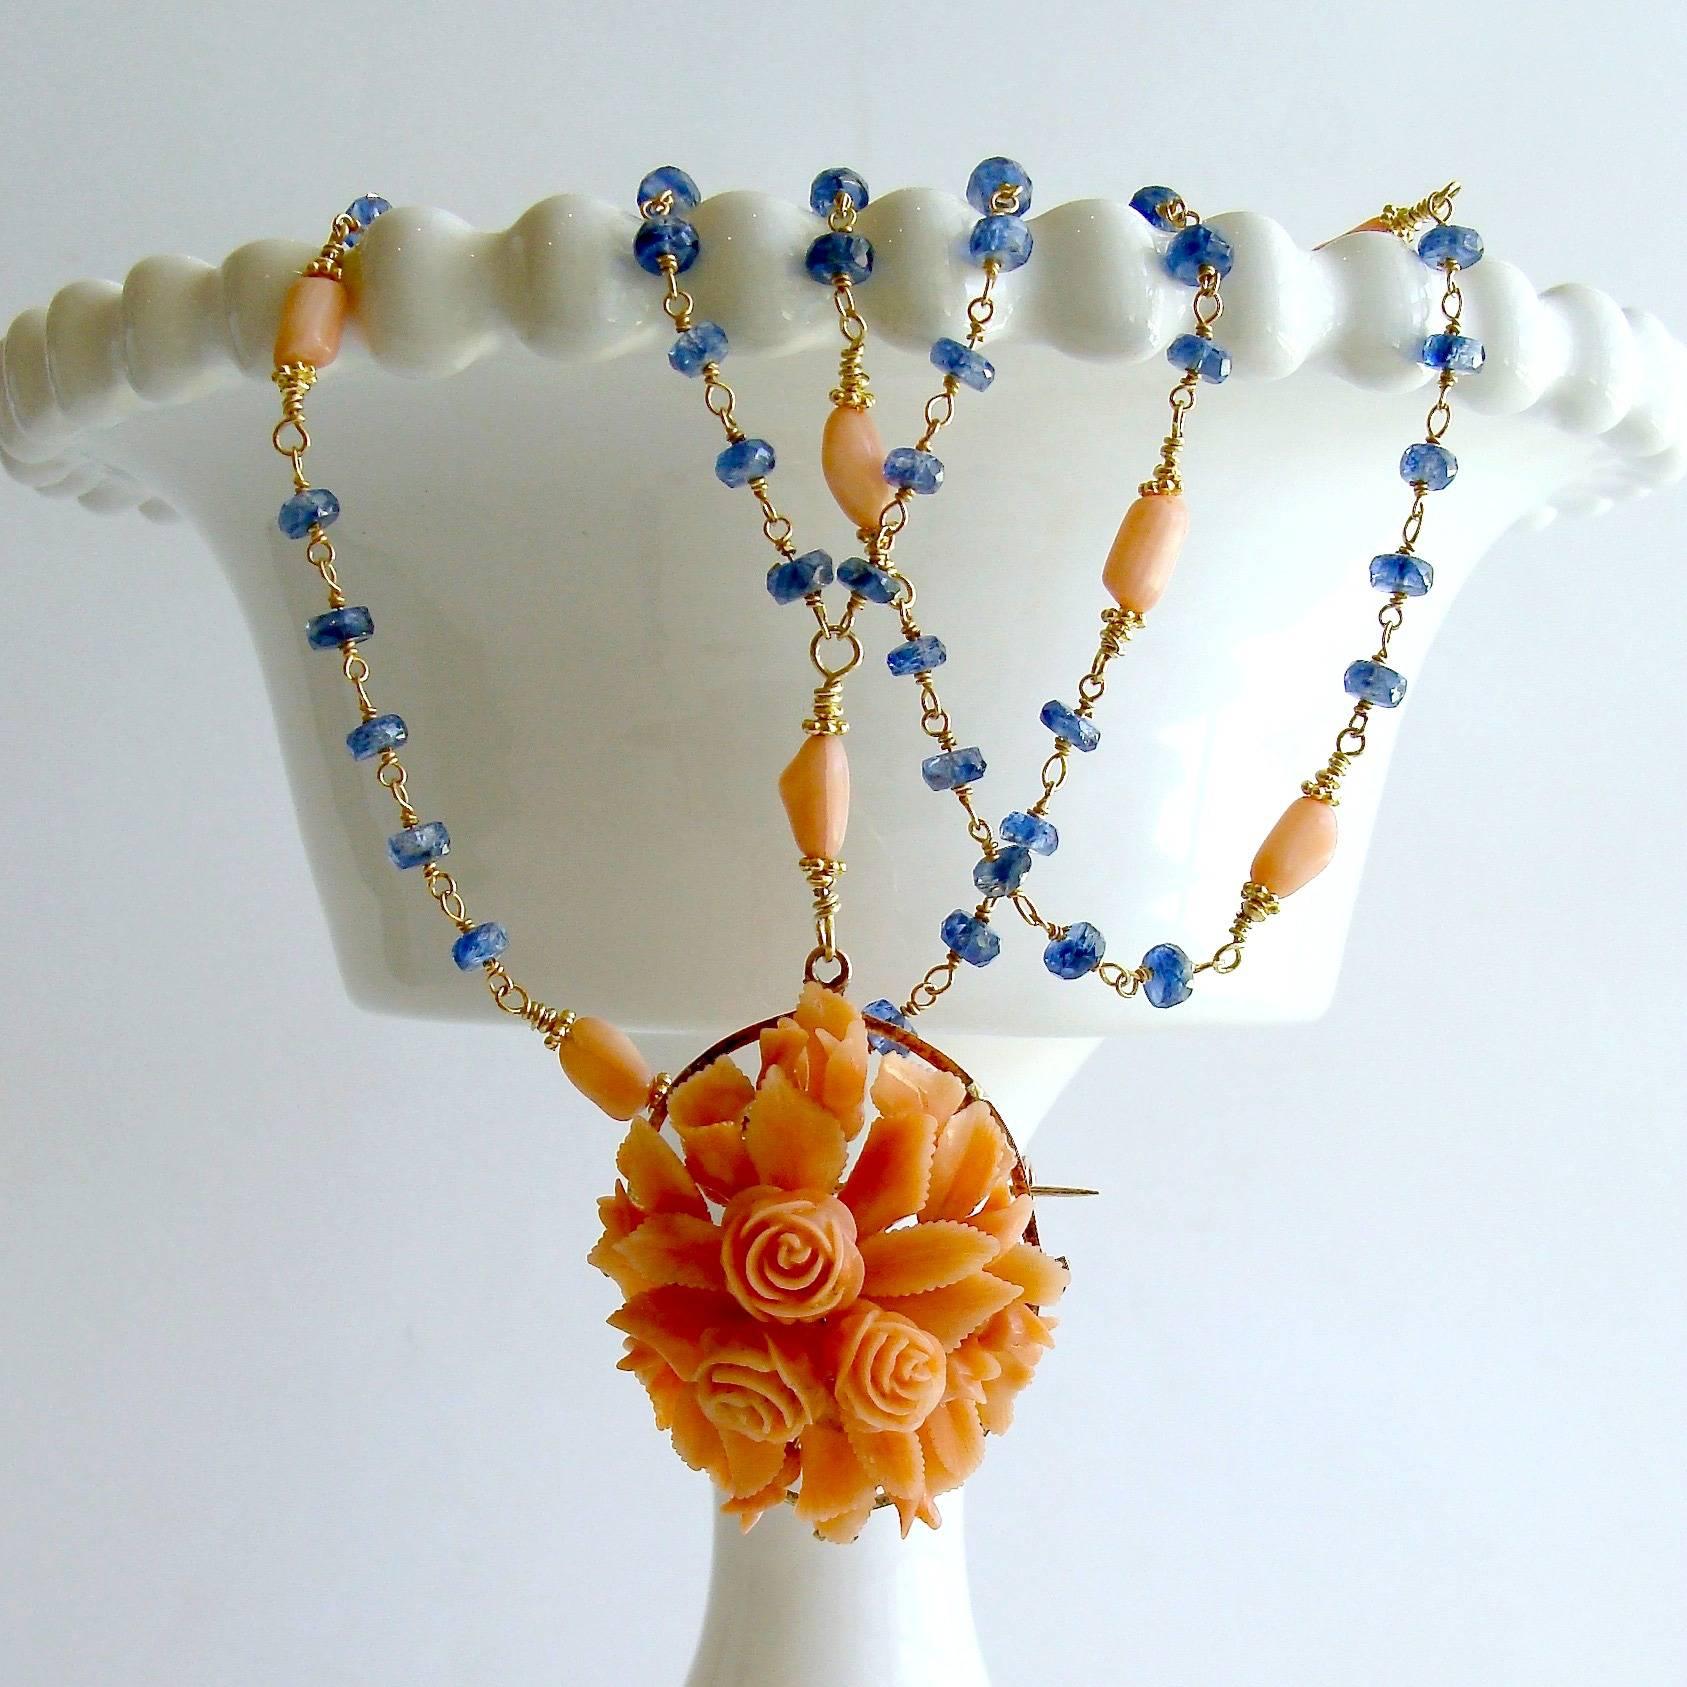 Daphne Necklace.

A gorgeous 14K gold antique hand-carved foliate brooch of delicate peach coral, has become the focal point of this lovely necklace of blue hand-linked kyanite interspersed with gentle coral beads.  The deep water blue of the